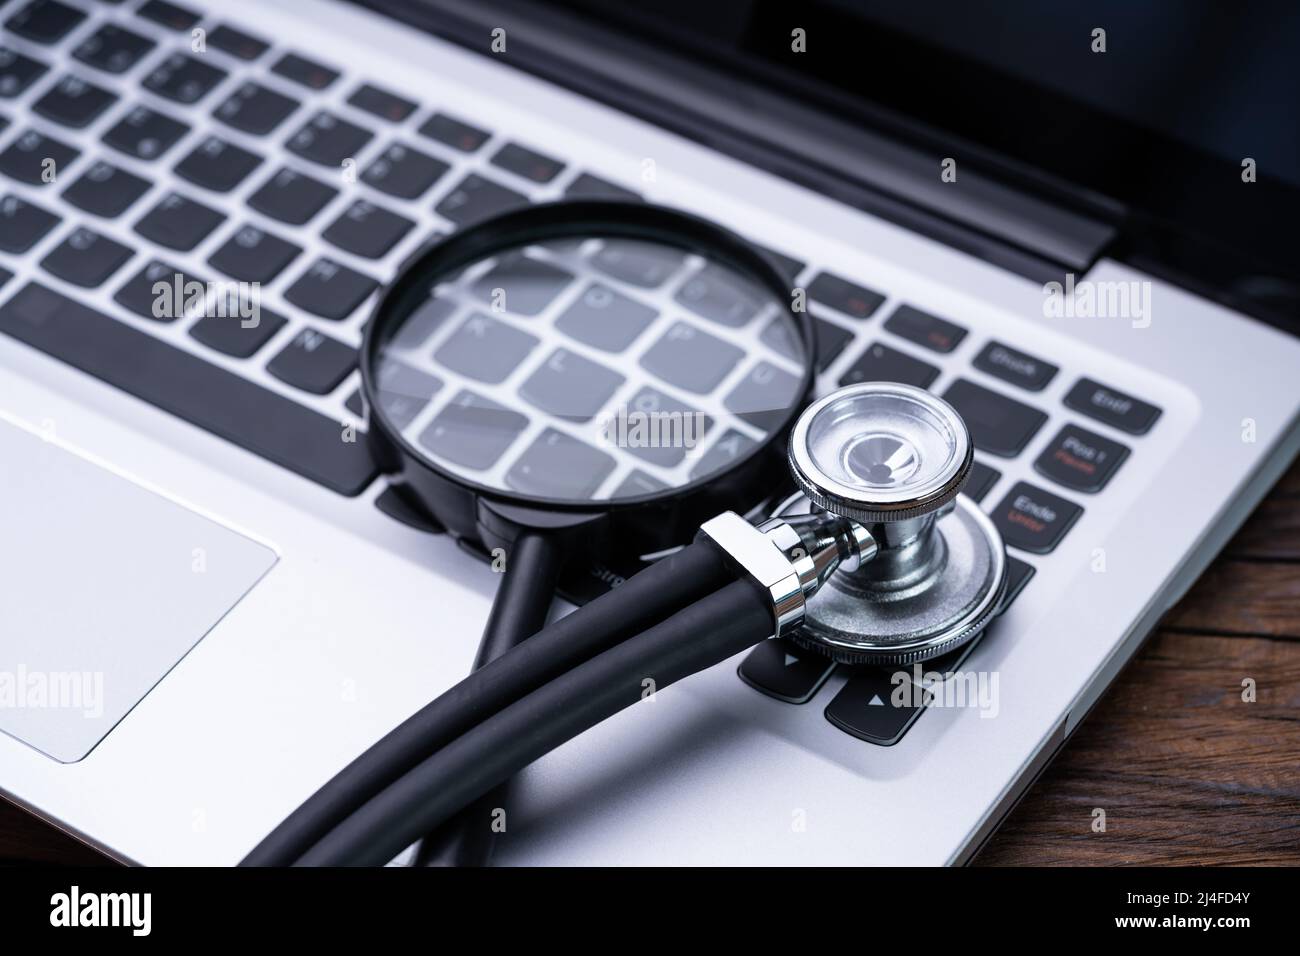 Medical Health Check Diagnose- Und Business Software-Programme Stockfoto